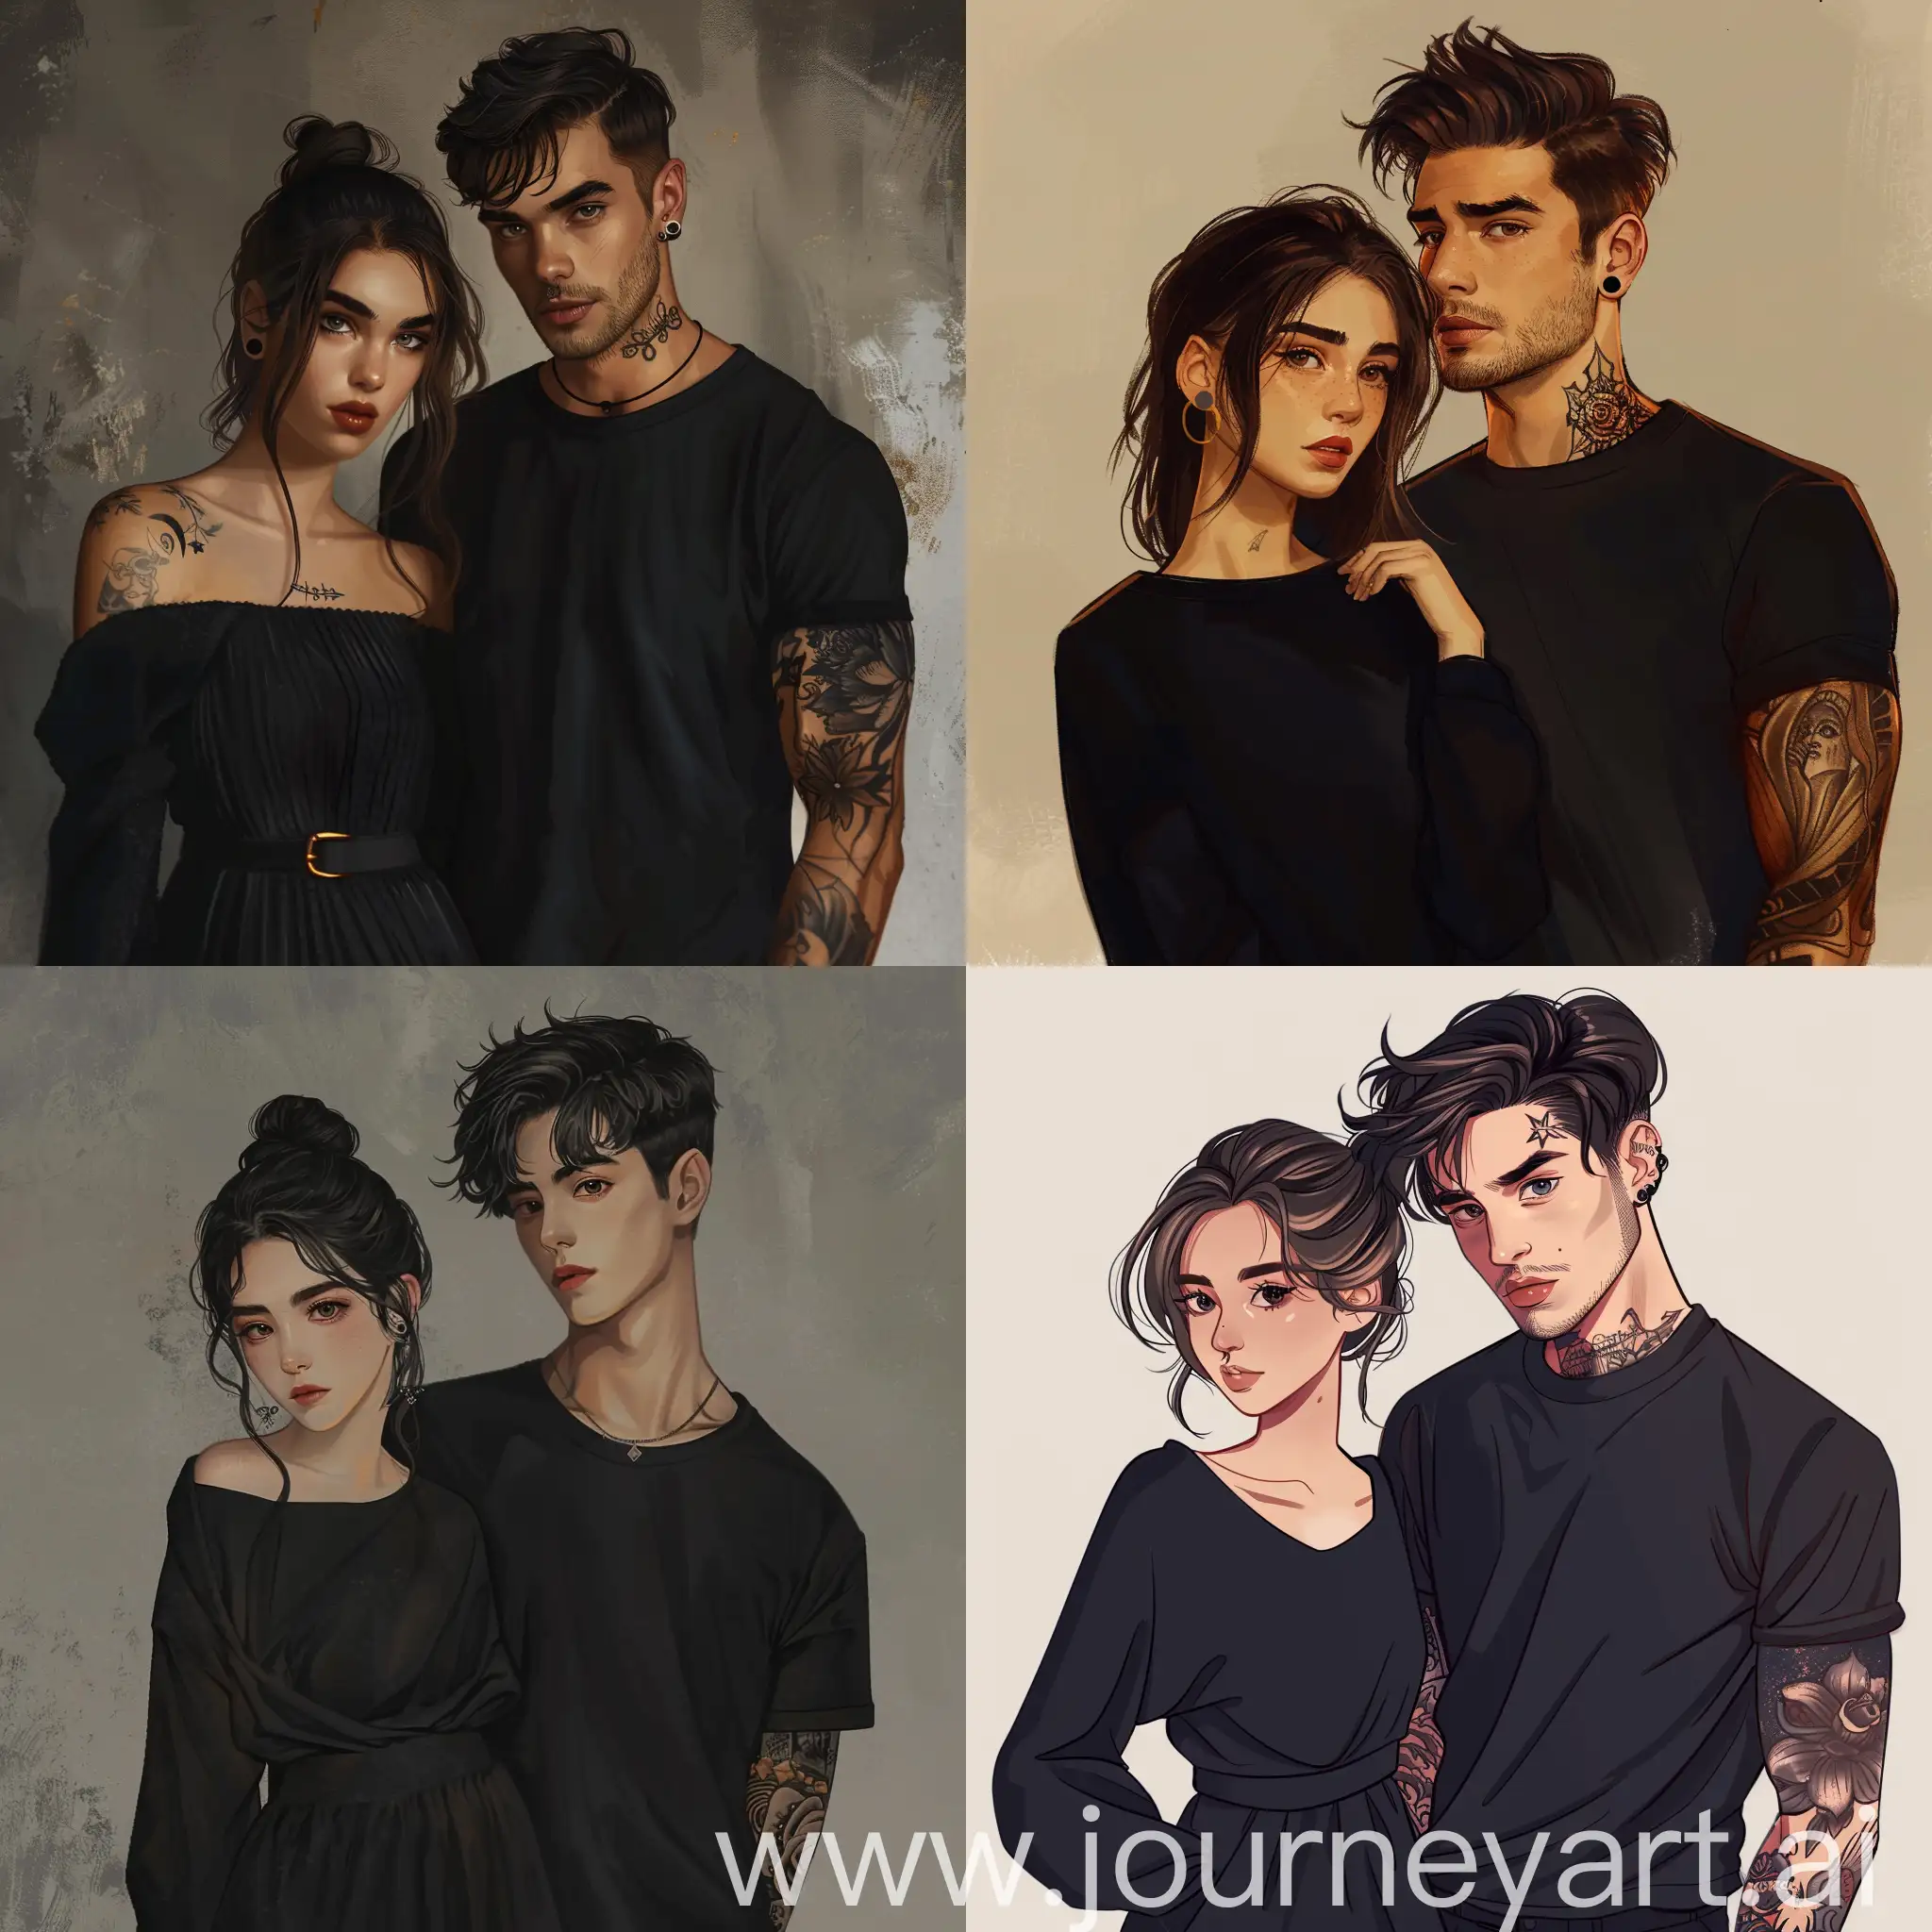 a sweet girl about 18 years old, she has a black warm dress and a guy about 25 years old, he has dark hair and he has very short hair, he wears a black T-shirt and he has tattoos. in the art style